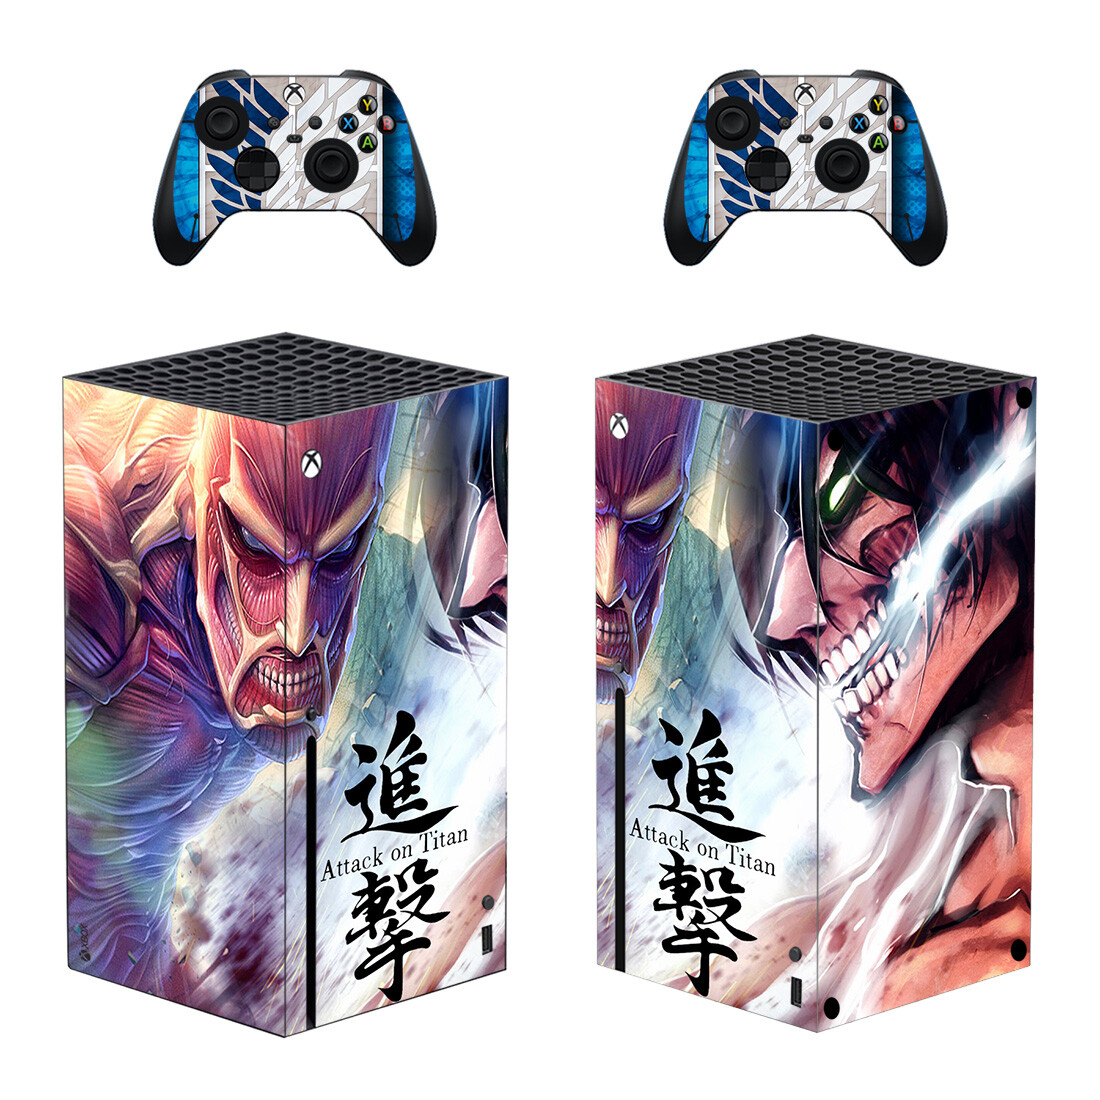 Attack on Titan Skin Sticker For Xbox Series X And Controllers